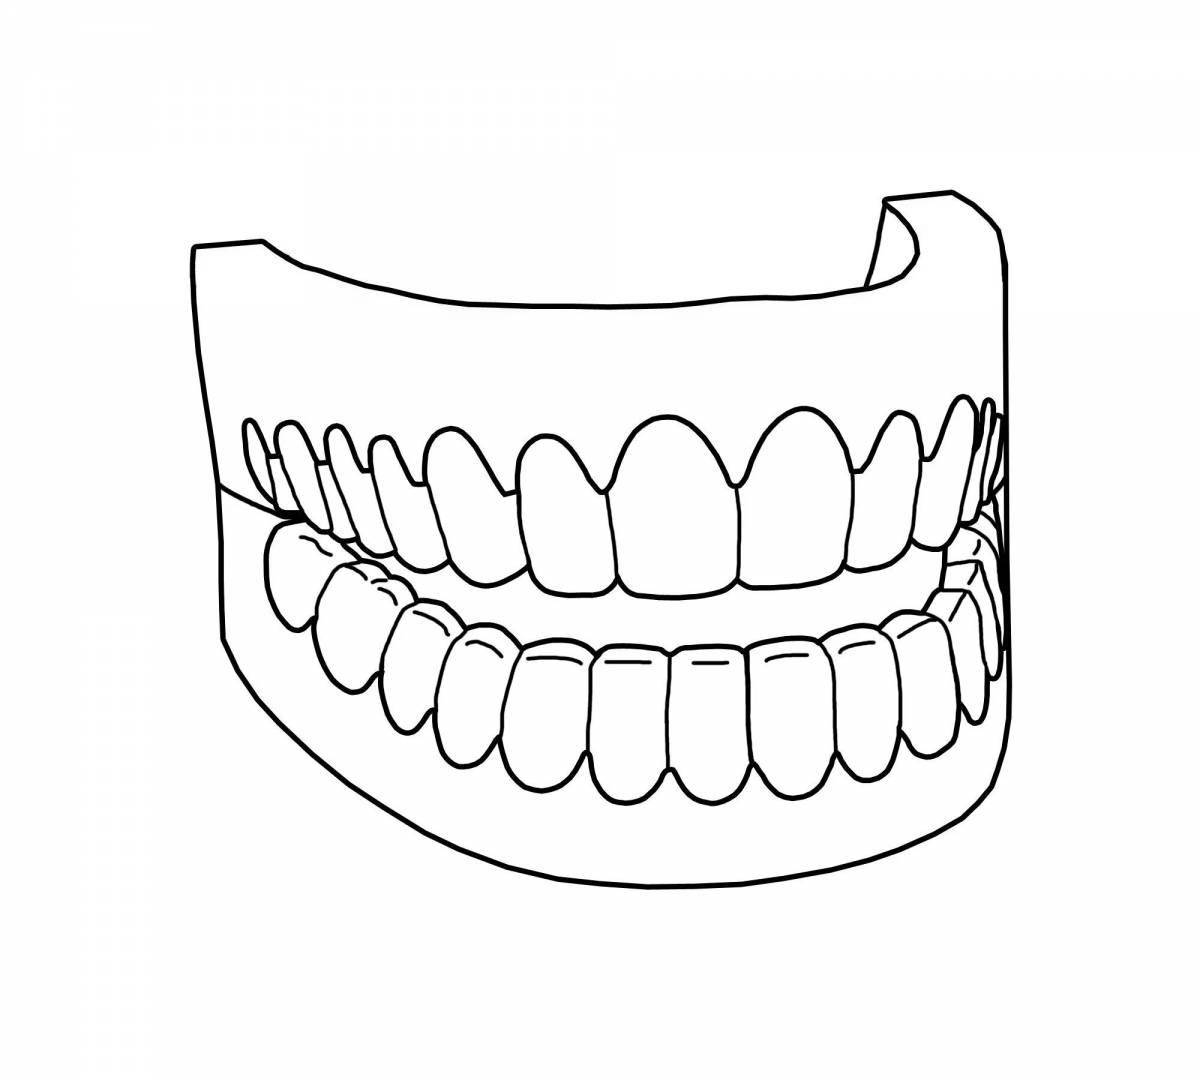 Dazzling teeth coloring book for kids